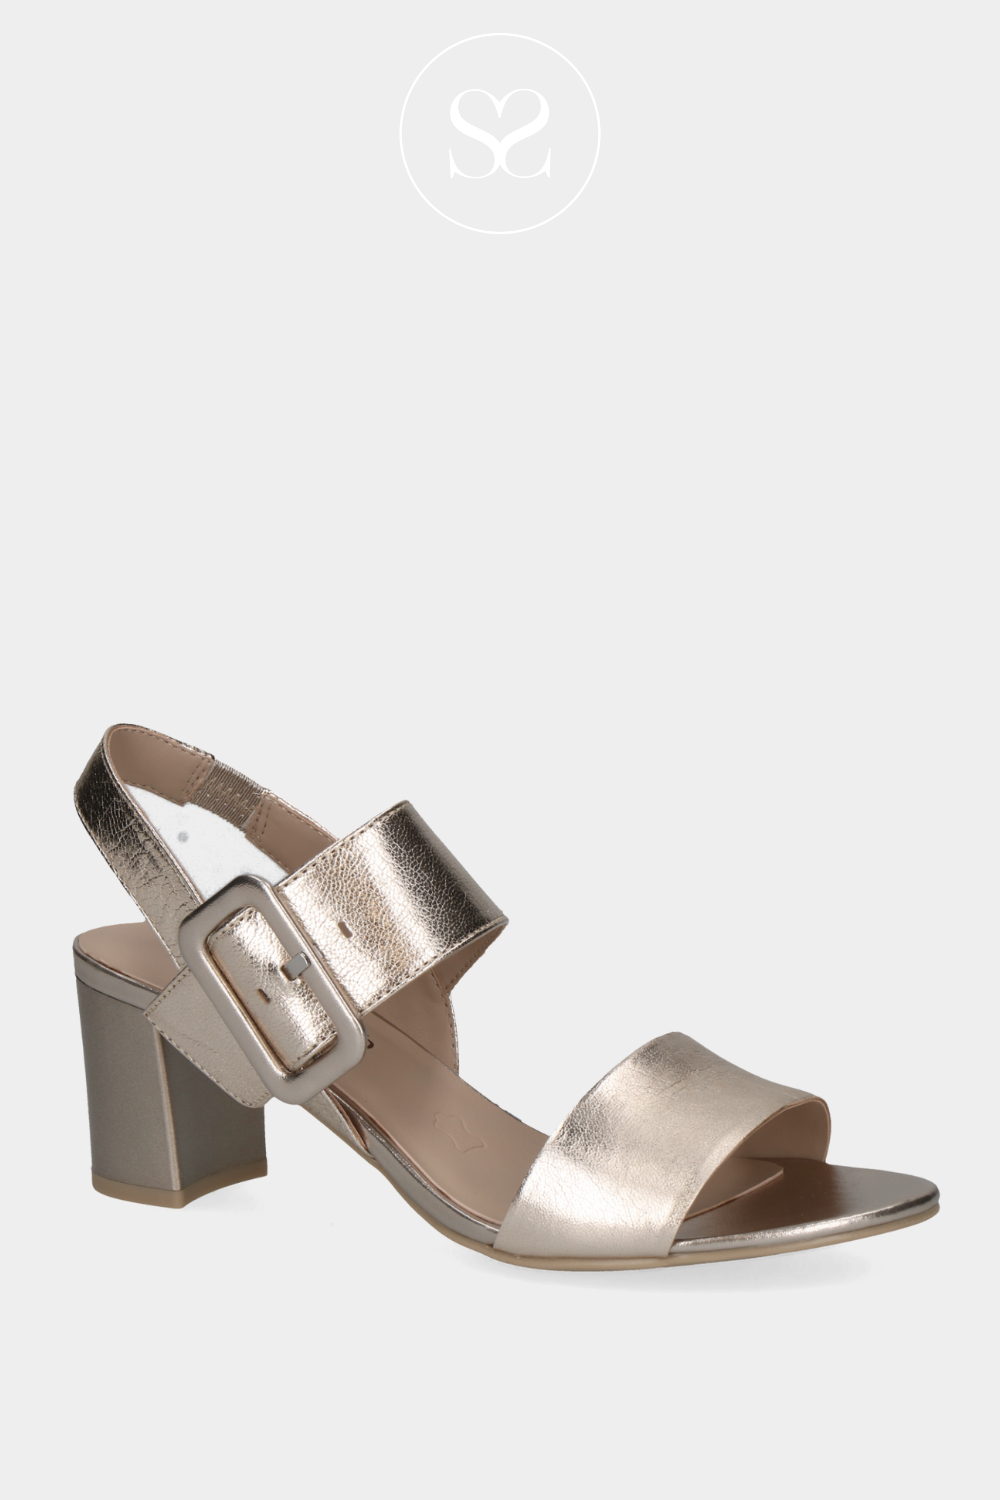 CAPRICE 9-28306-42 GOLD LEATHER BLOCK HEEL SANDALS WITH TWO THICK STRAPS ACROSS FOOT AND ADJUSTABLE BUCKLE